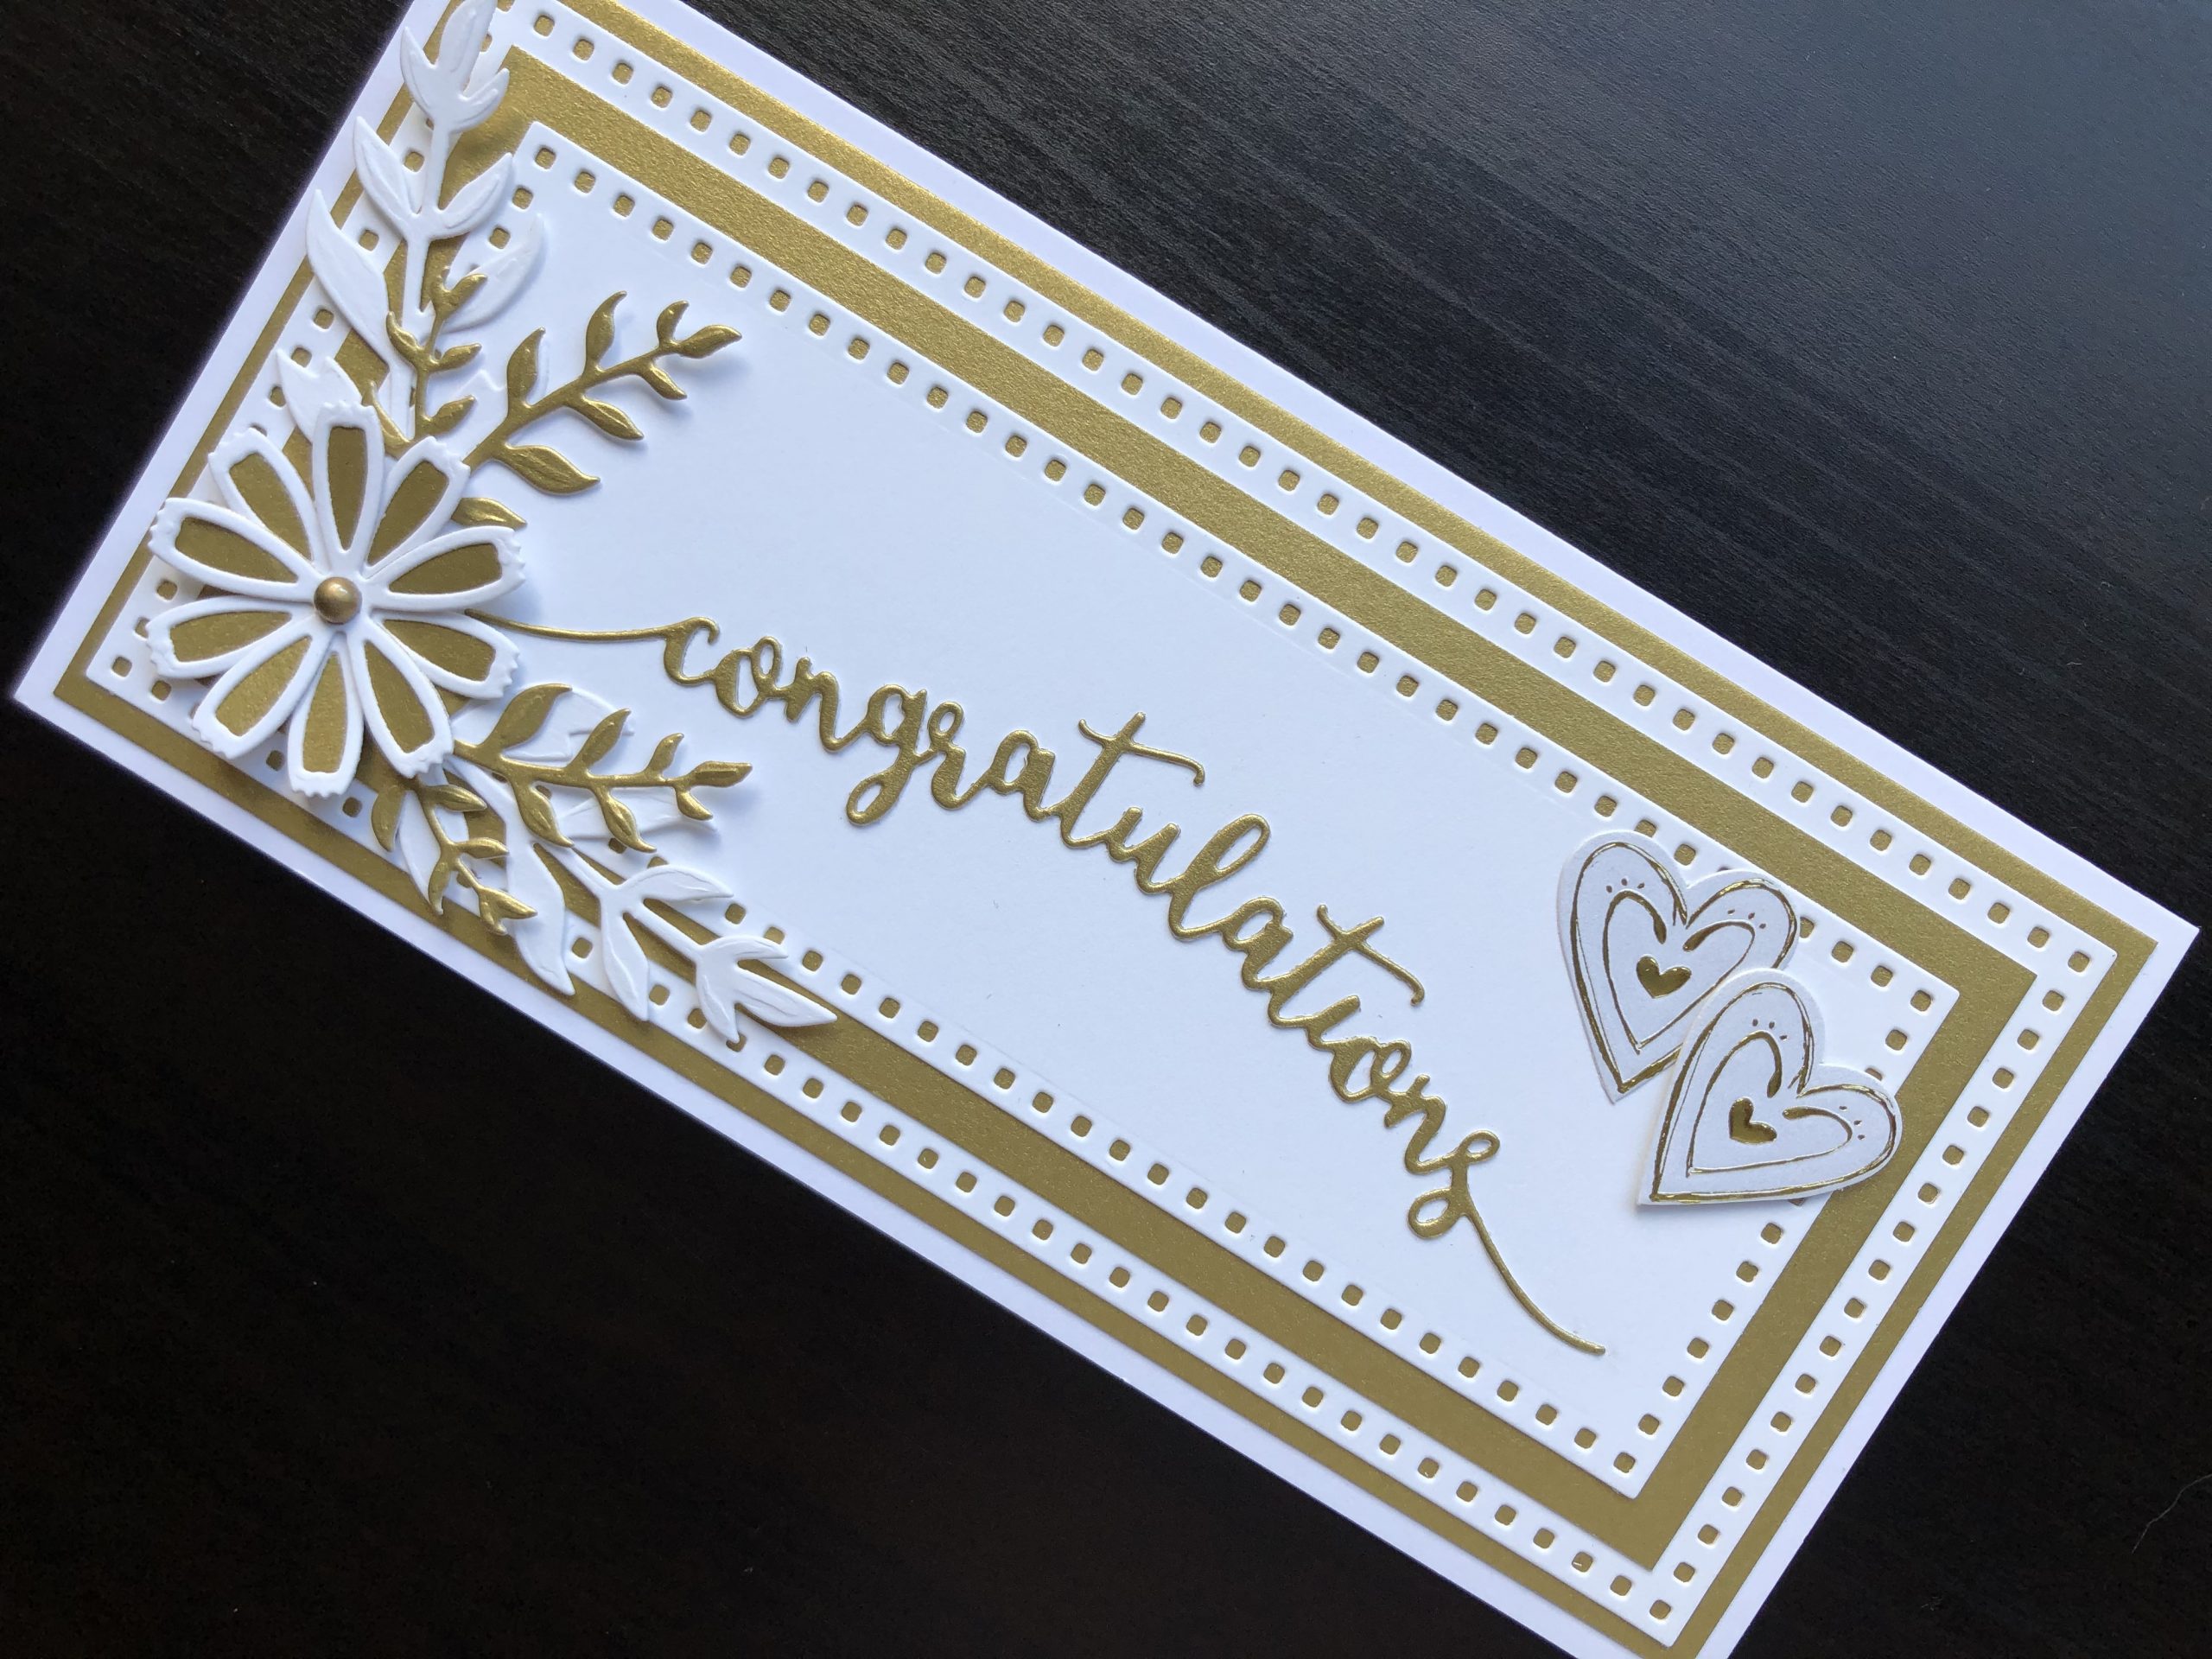 Hand made wedding card with die cut layers, flowers and sentiment.